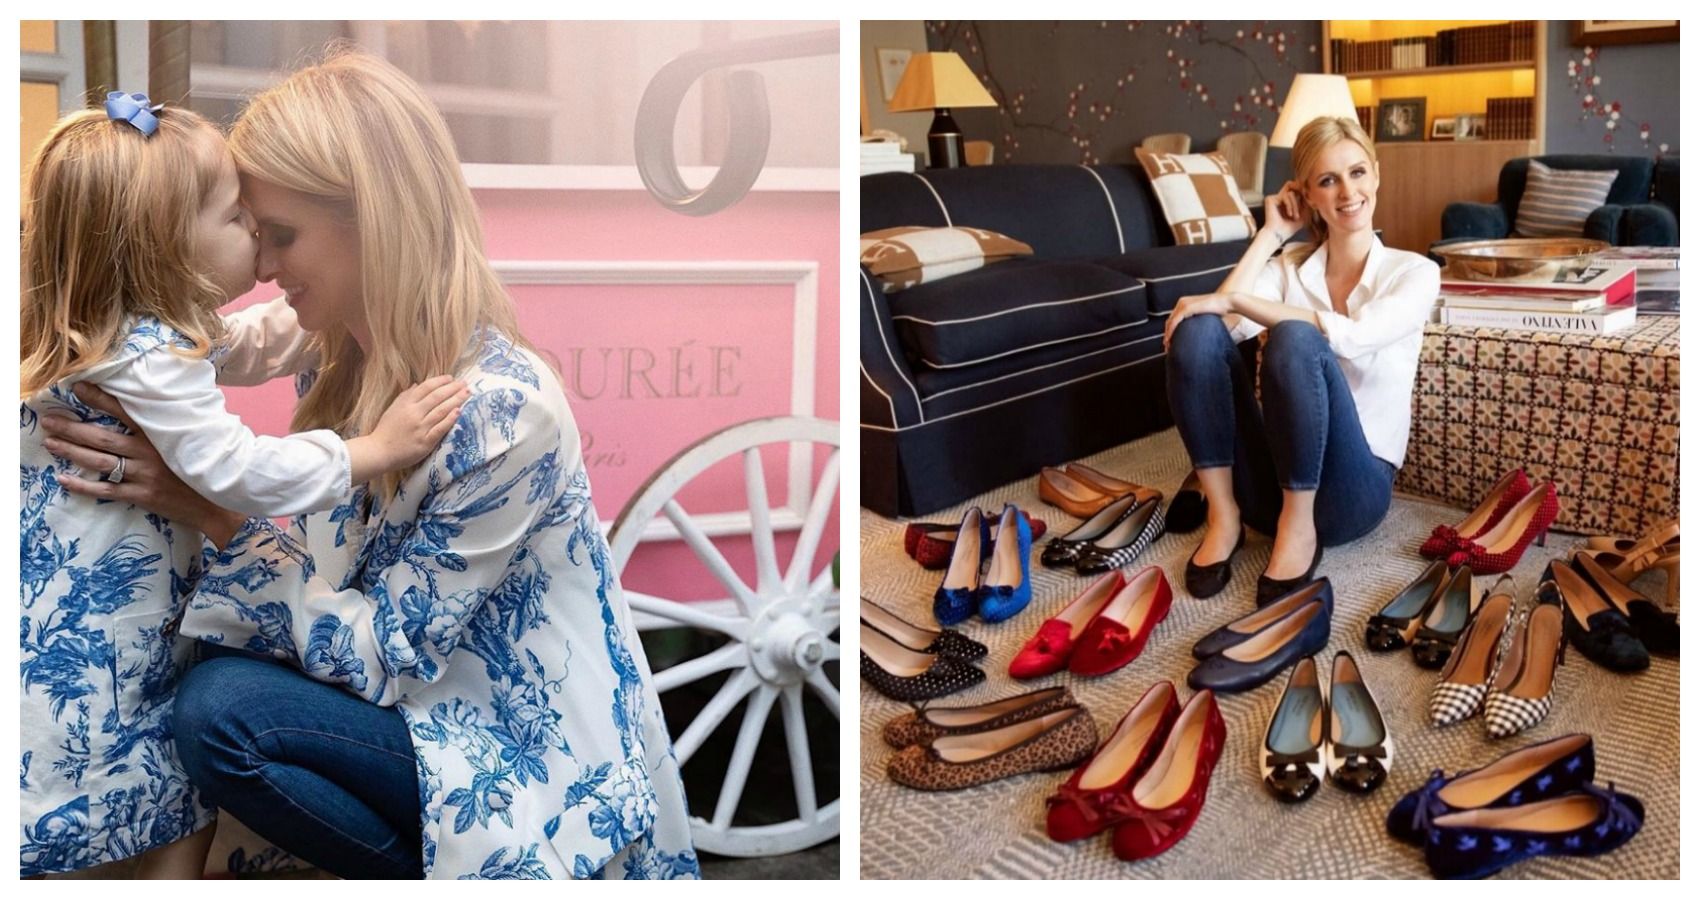 Nicky Hilton with daughter and posing with shoe collection